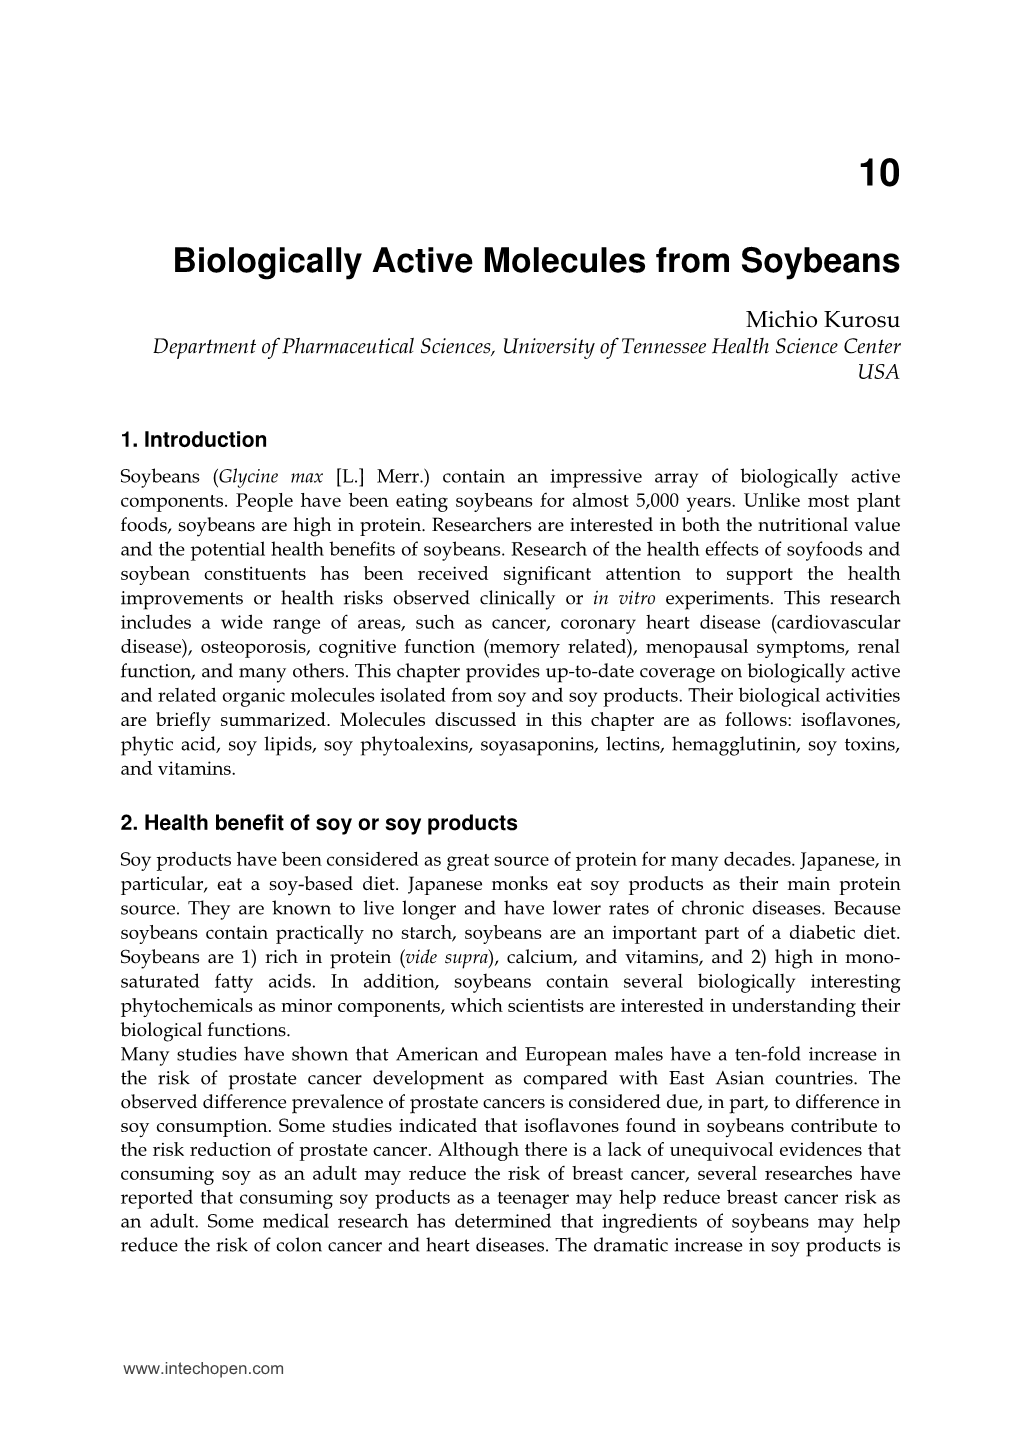 Biologically Active Molecules from Soybeans